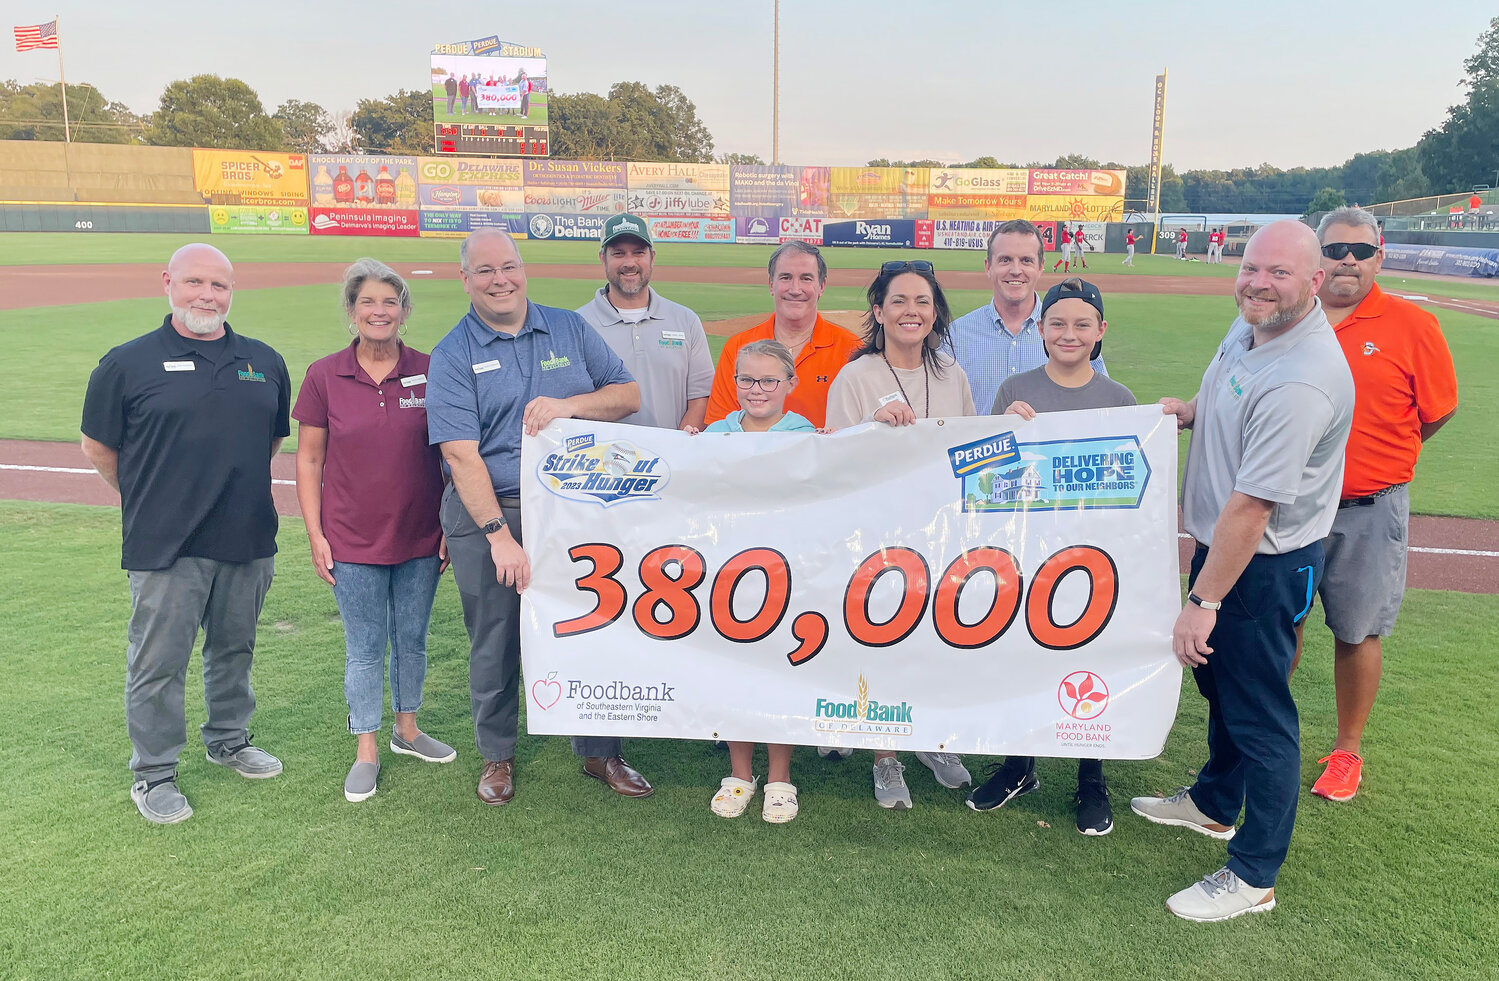 As part of Perdue Farms’ “Delivering Hope to Our Neighbors” initiative focused on improving the quality of life in our communities through hunger relief, the company teamed with the Delmarva Shorebirds and three Delmarva Peninsula food banks to generate 380,000 meals during the season-long 2023 Perdue Strike Out Hunger Challenge on Delmarva. Above from left, John Snarsky of Food Bank of Delaware Milford Branch, Cathy Kanefsky, Chard Robinson and Larry Haas of Food Bank of Delaware, Mike Hooks of Maryland Food Bank in Salisbury, Drew Getty of Perdue Farms, Zach Kellerman of Food Bank of Delaware and Jimmy Sweet of the Delmarva Shorebirds. Directly behind the banner are Melissa Smith of Southeastern Virginia, and her children, Cora and Benji Liskey.